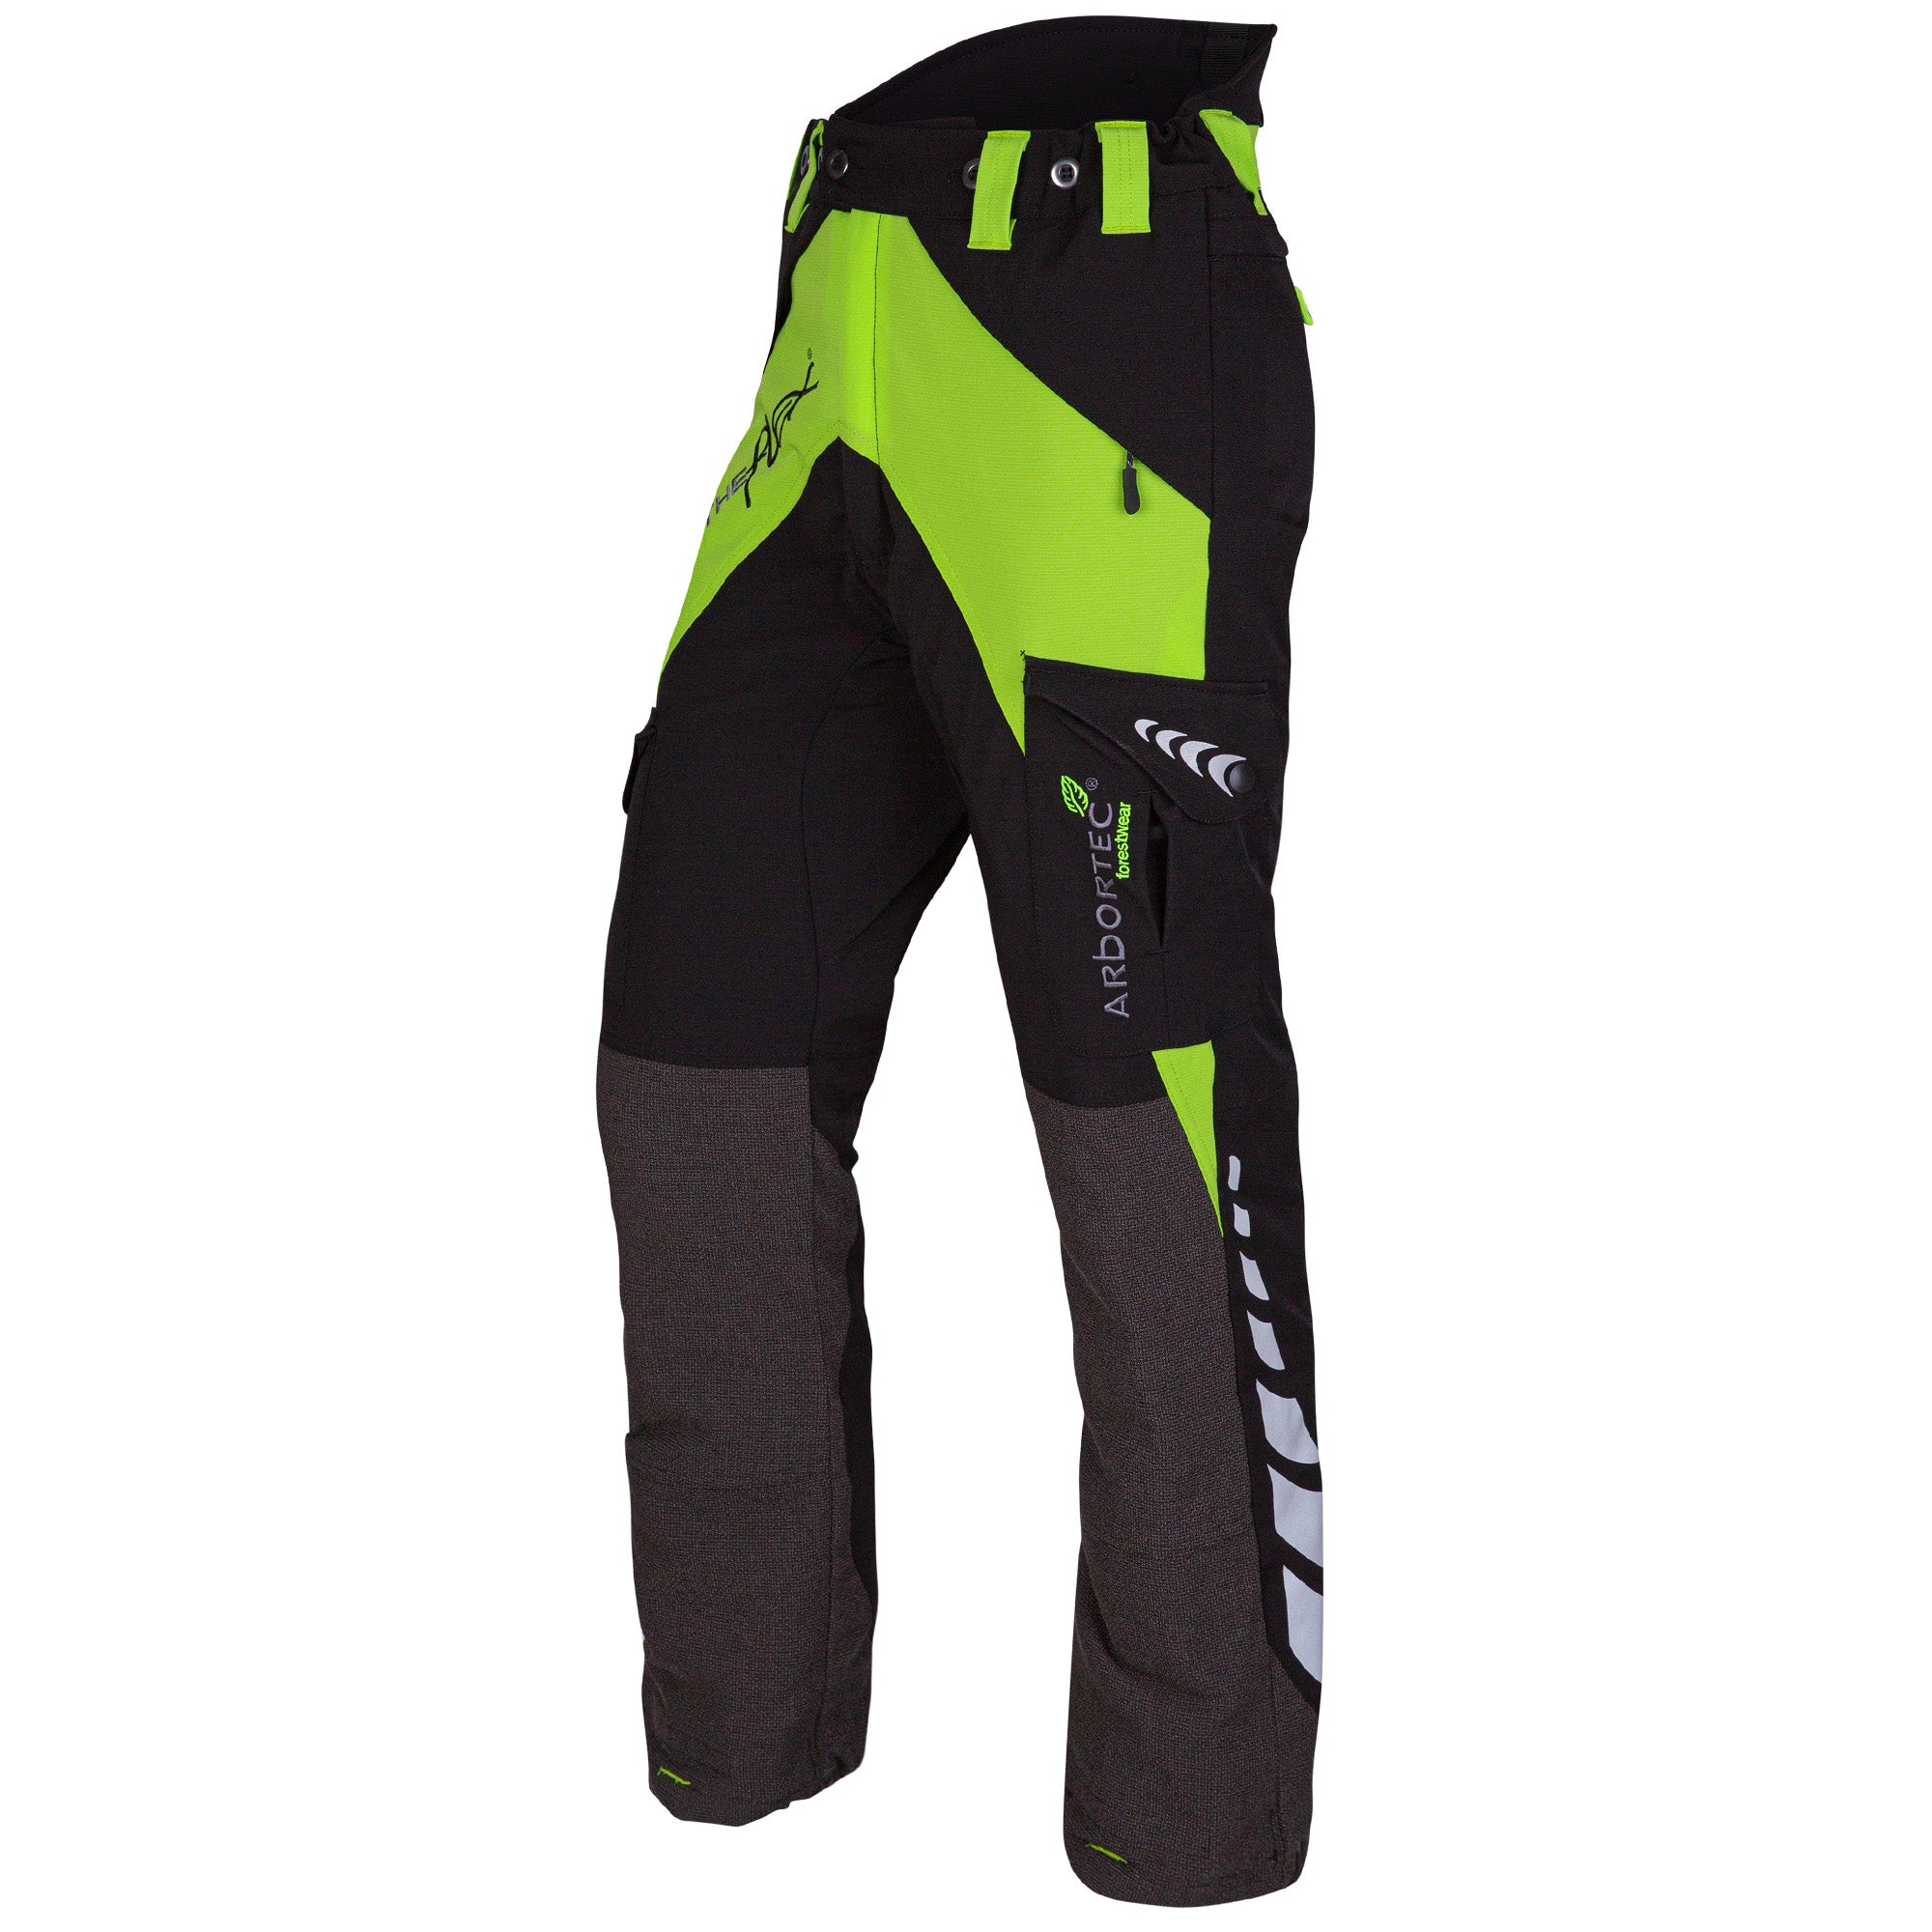 AT4010 Breatheflex Chainsaw Trousers Design A Class 1 - Lime.